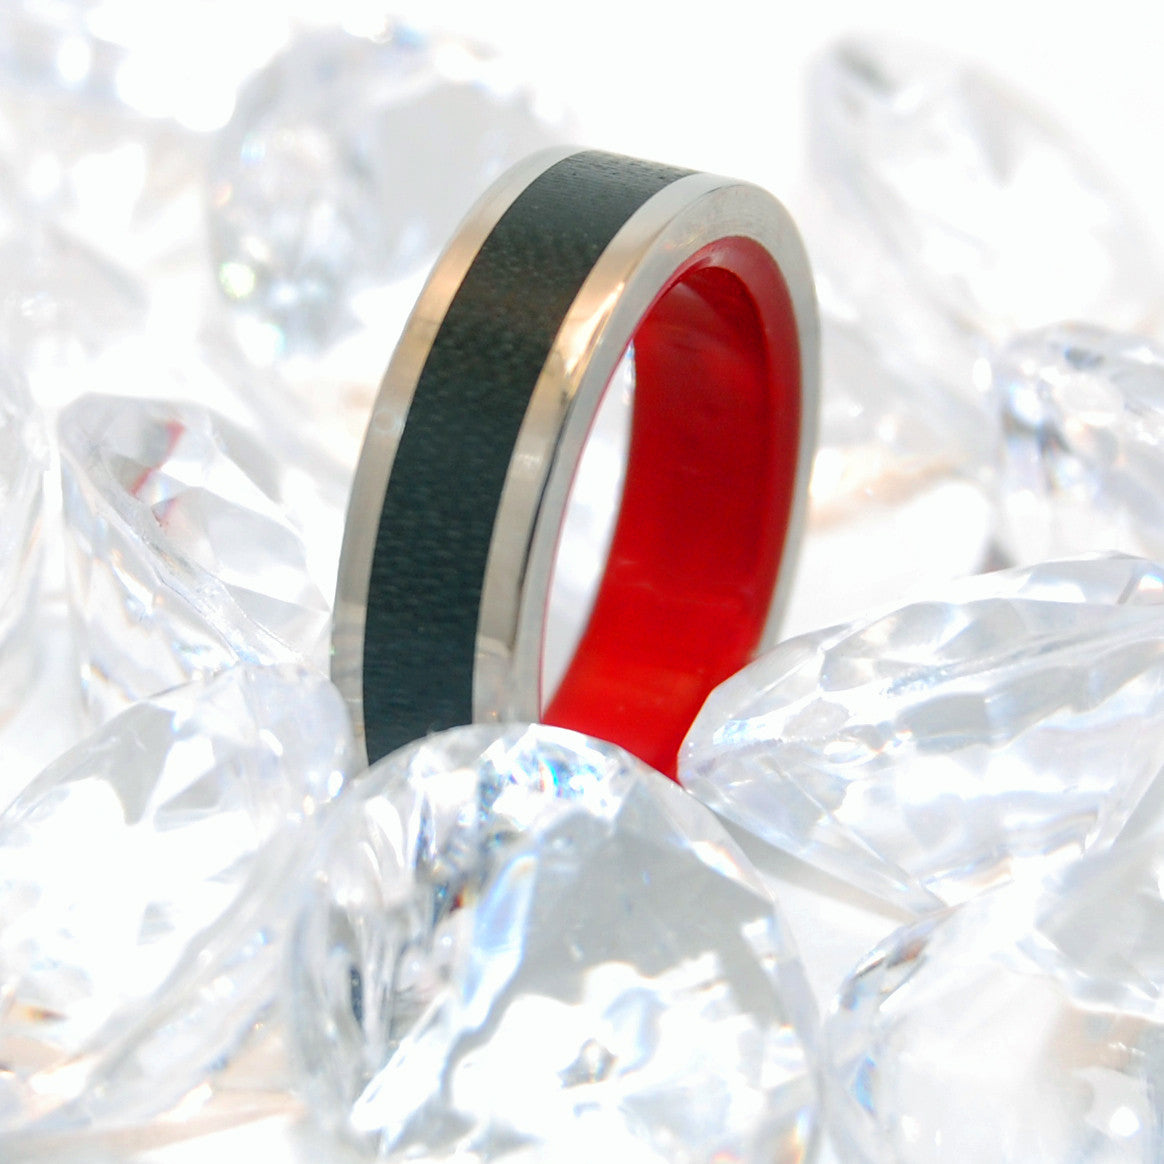 Hot! Hot! Hot! | Handcrafted Titanium Wedding Ring - Minter and Richter Designs